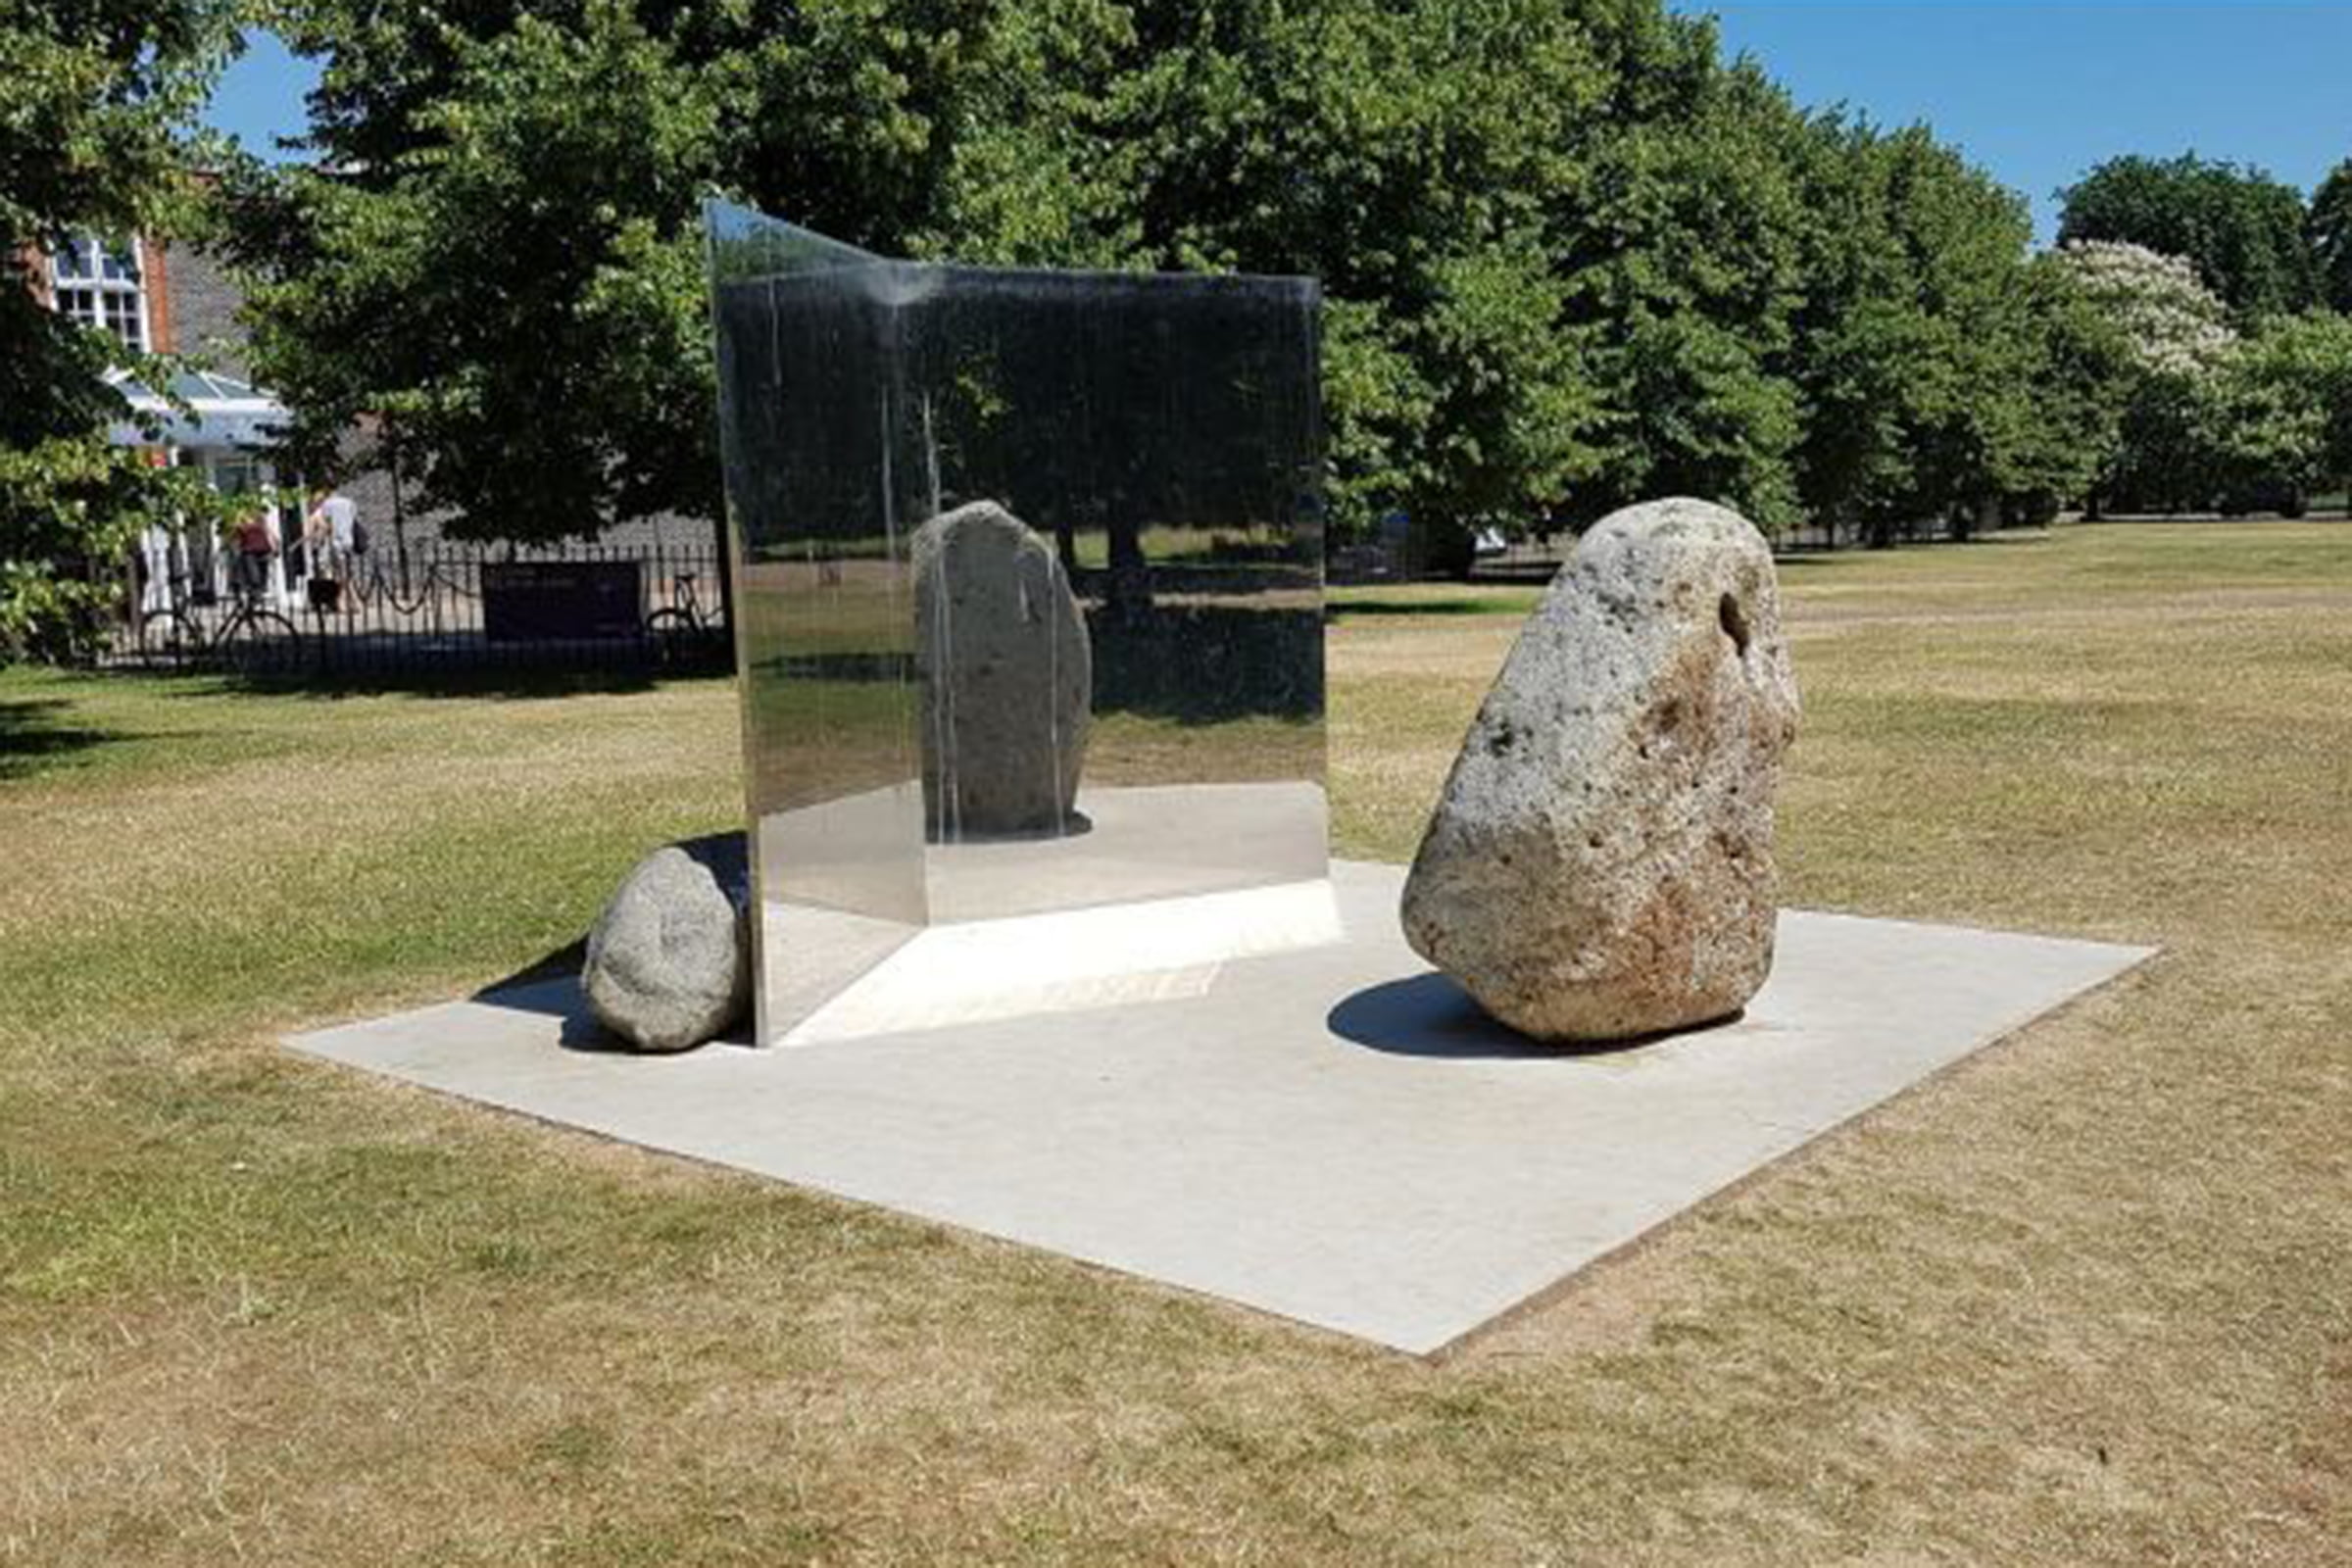 Finished artwork in situ on the finished plinth at The Serpentine Gallery, London